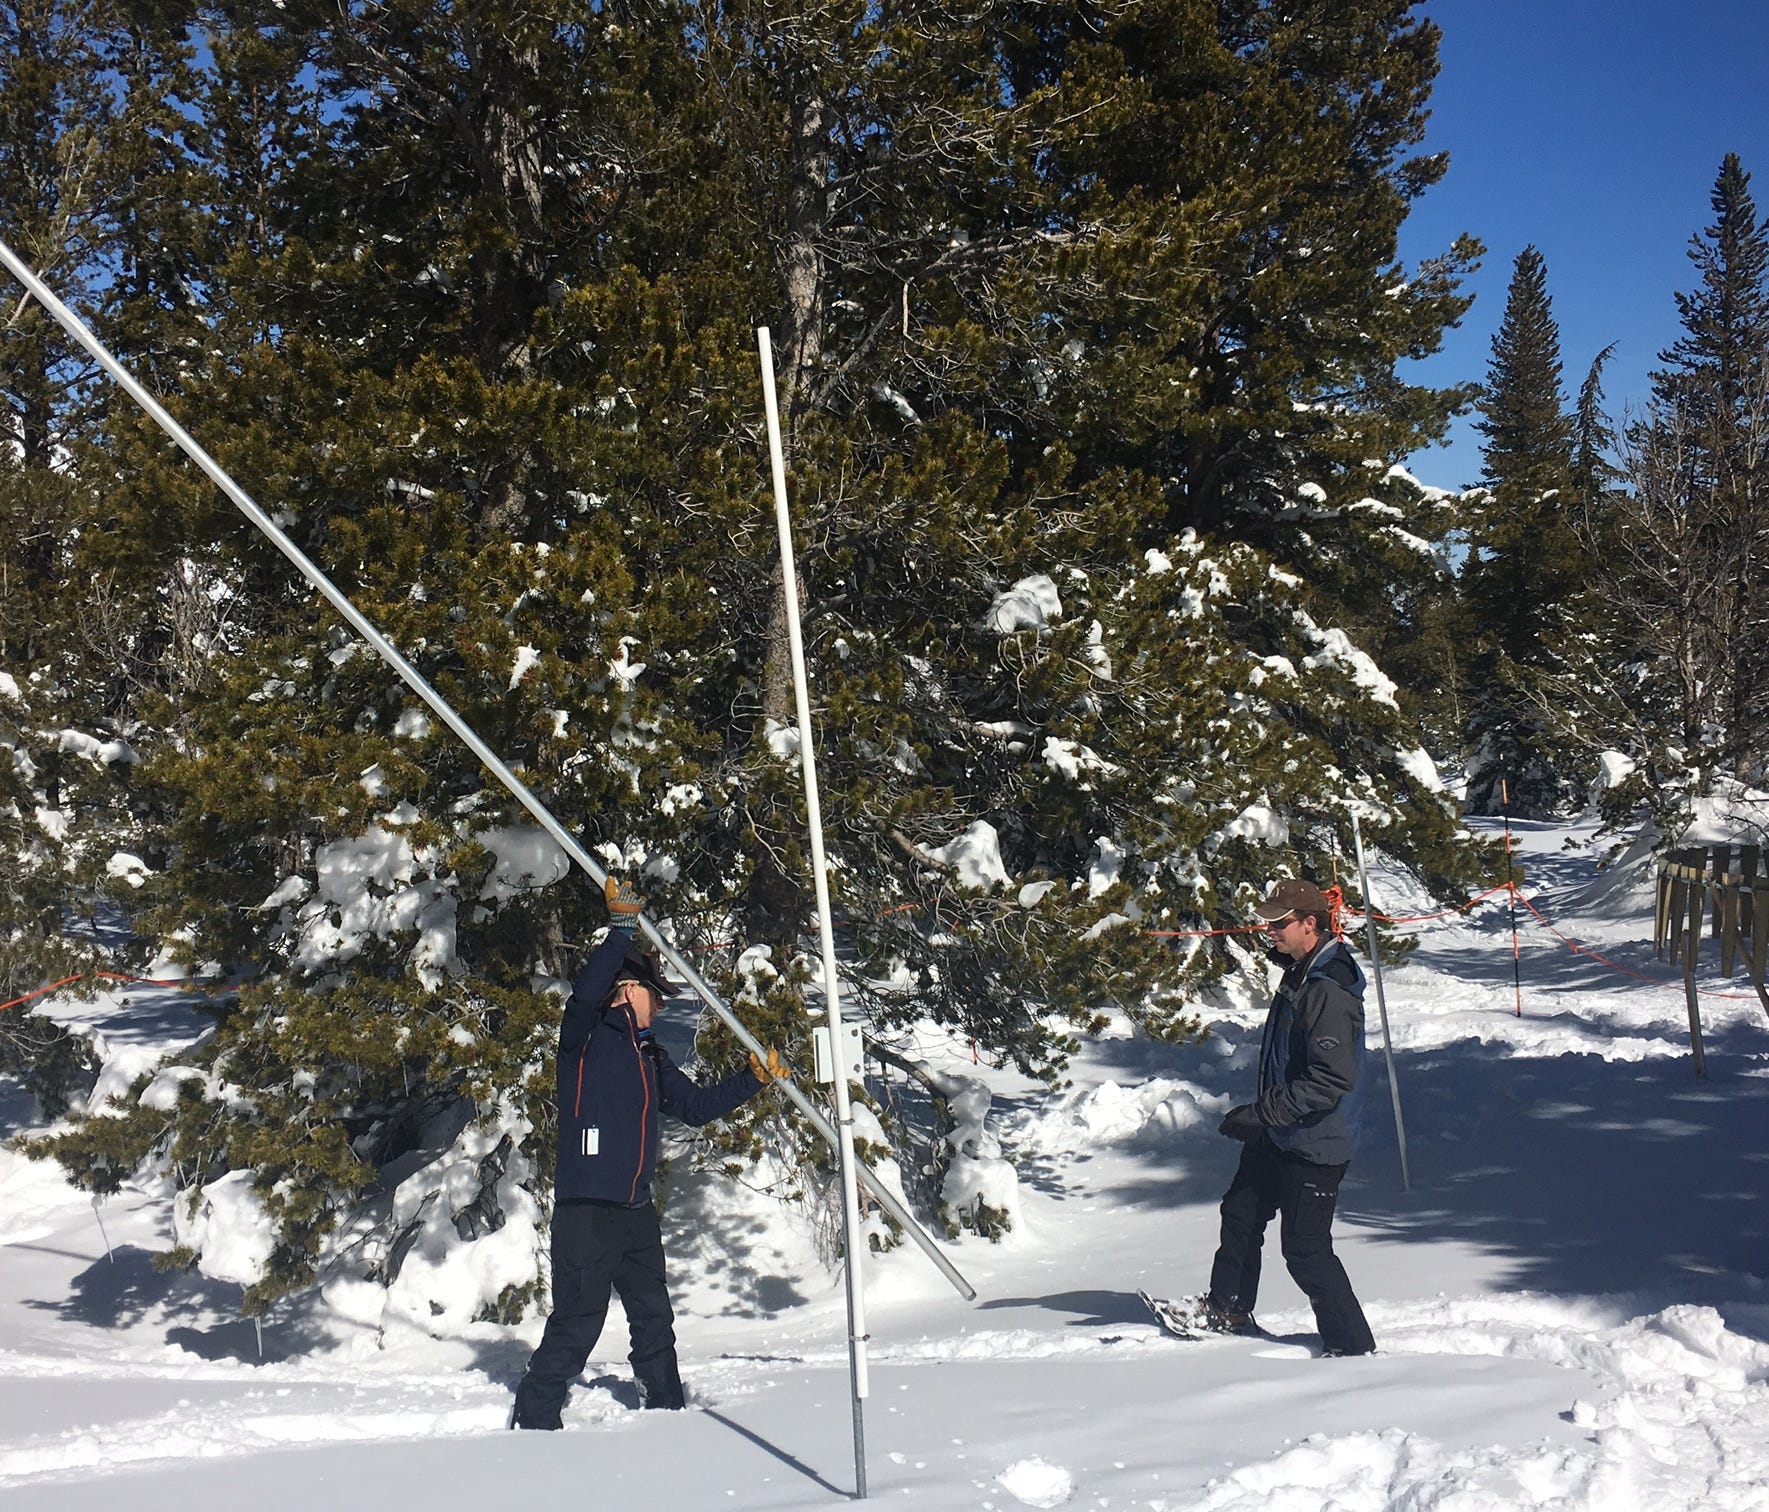 Hydrologist Jeff Anderson and district conservationist Jim Gifford of the Natural Resources Conservation Service Nevada ready a 20-foot tube used to measure snow depth in order to take a measurement of the snowpack on Slide Mountain on March 1, 2017.